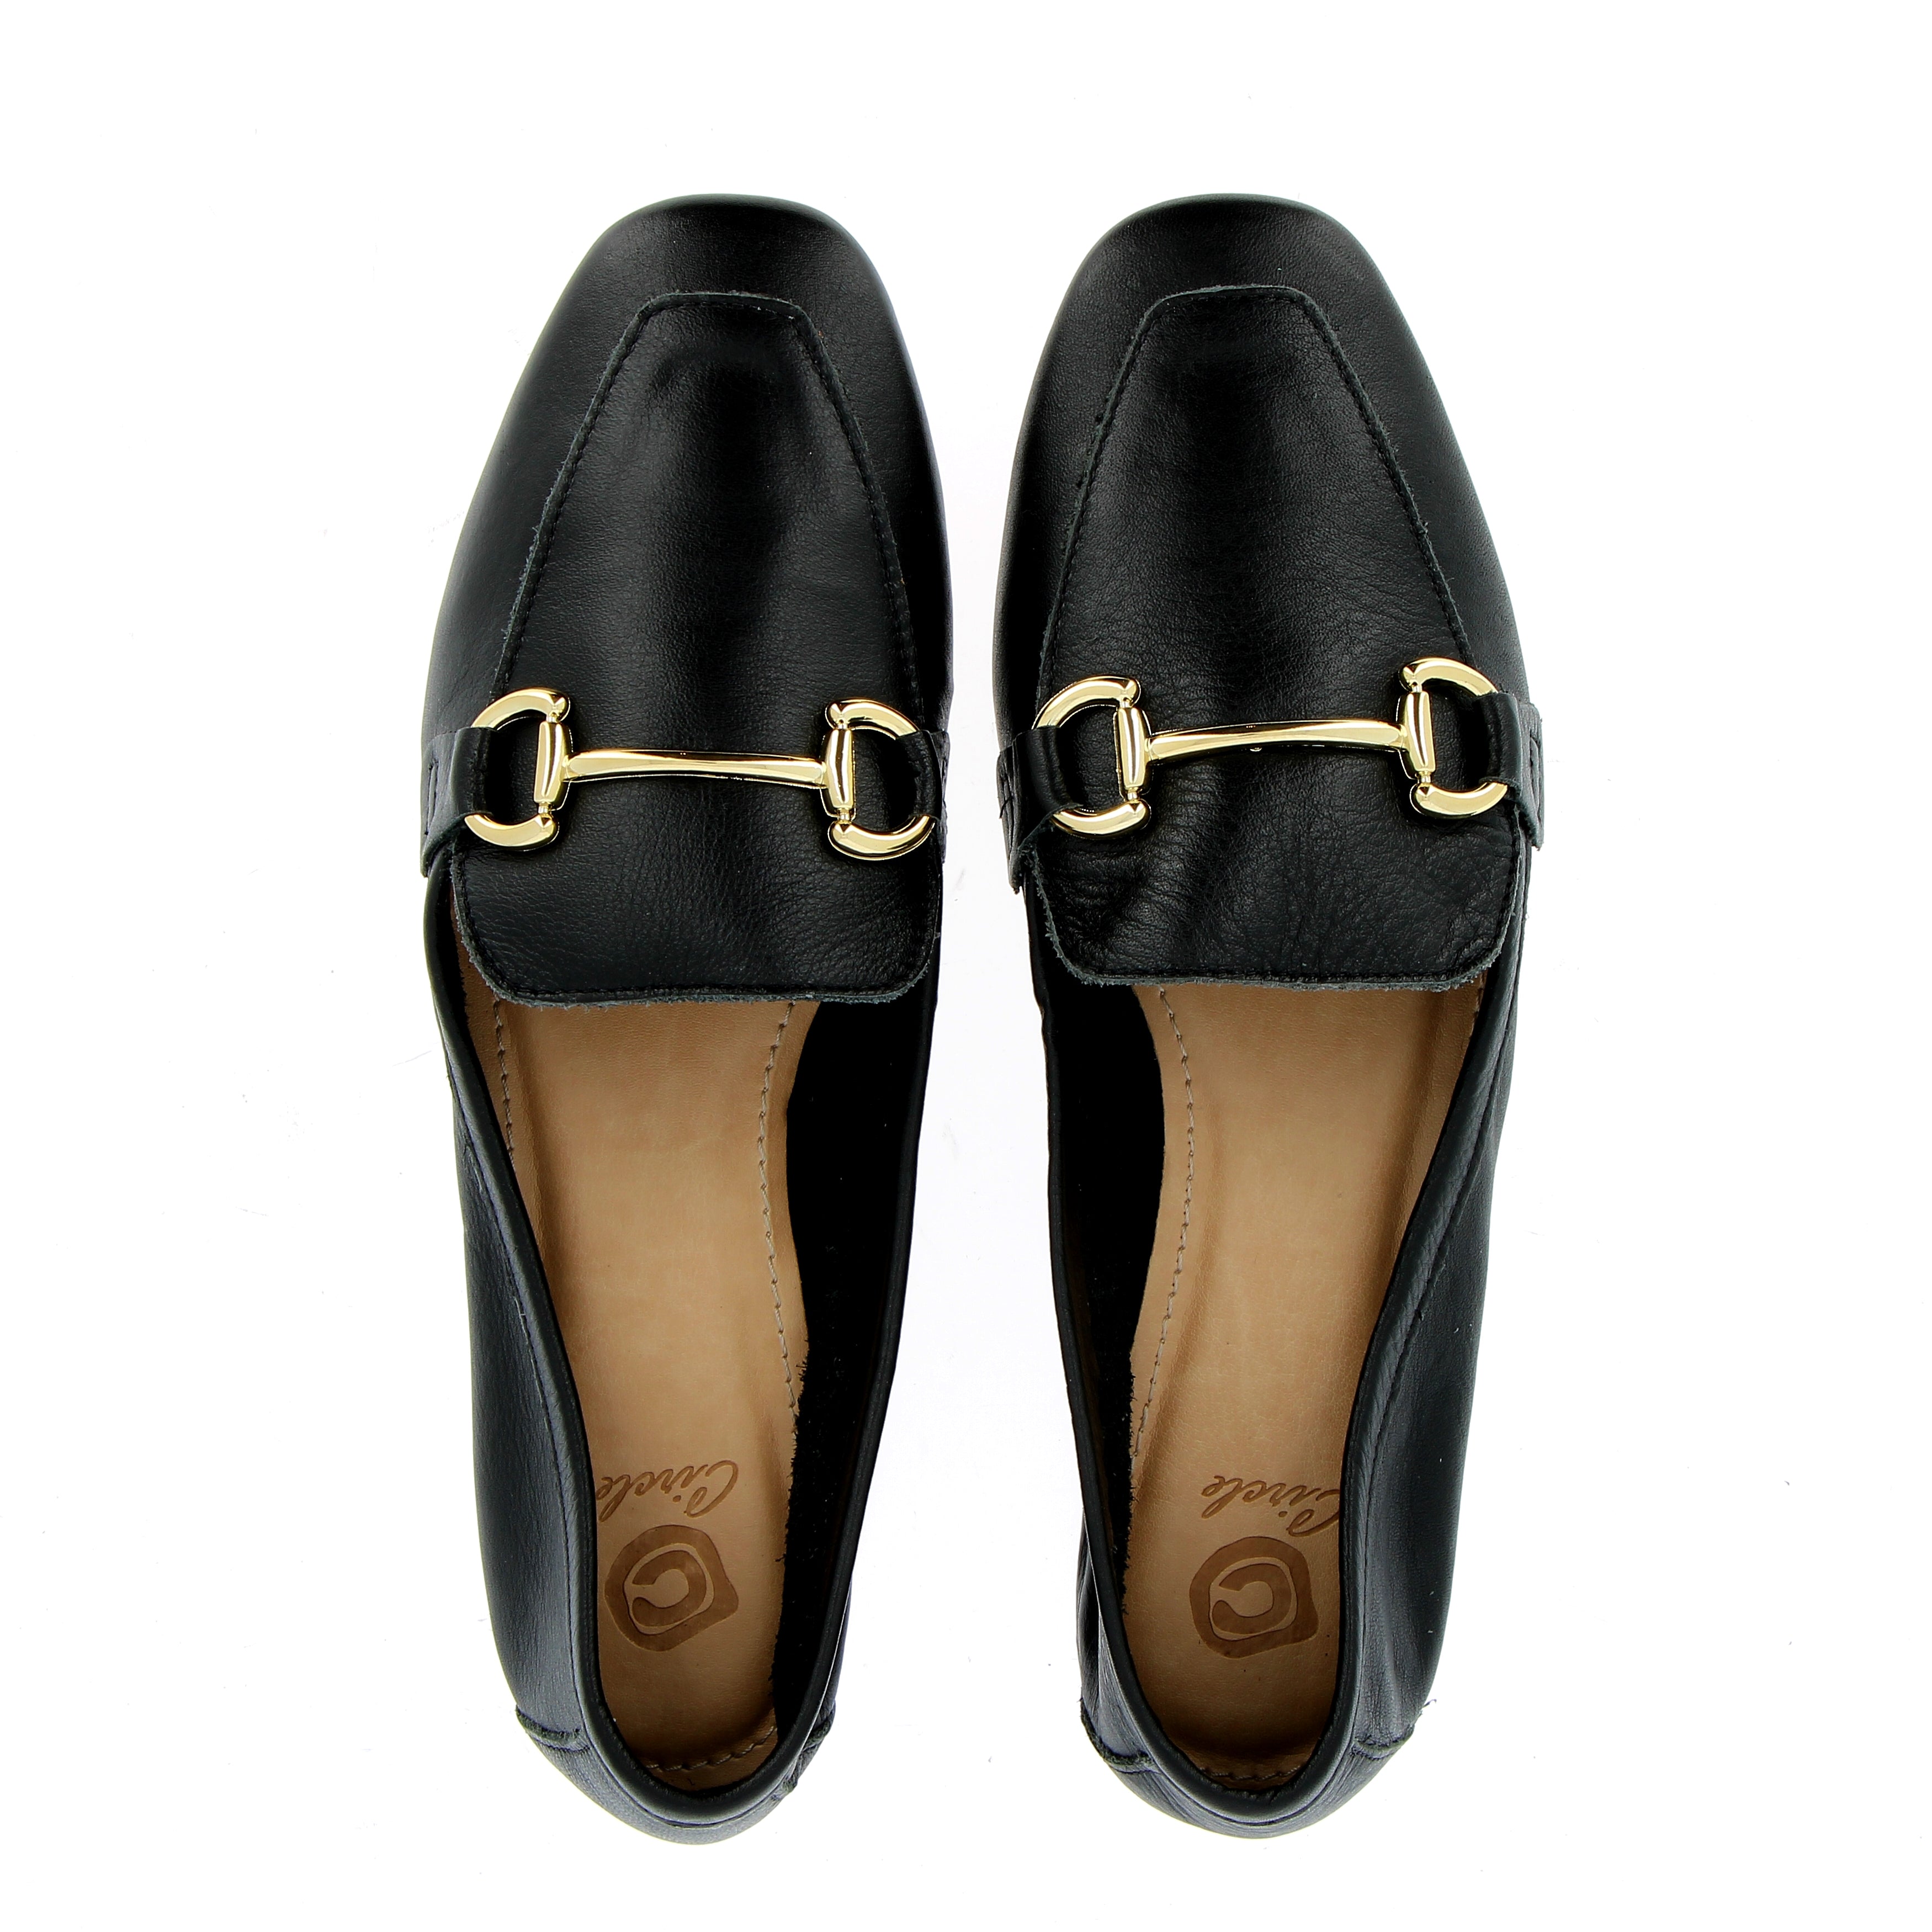 Moccasin in black leather with golden buckle